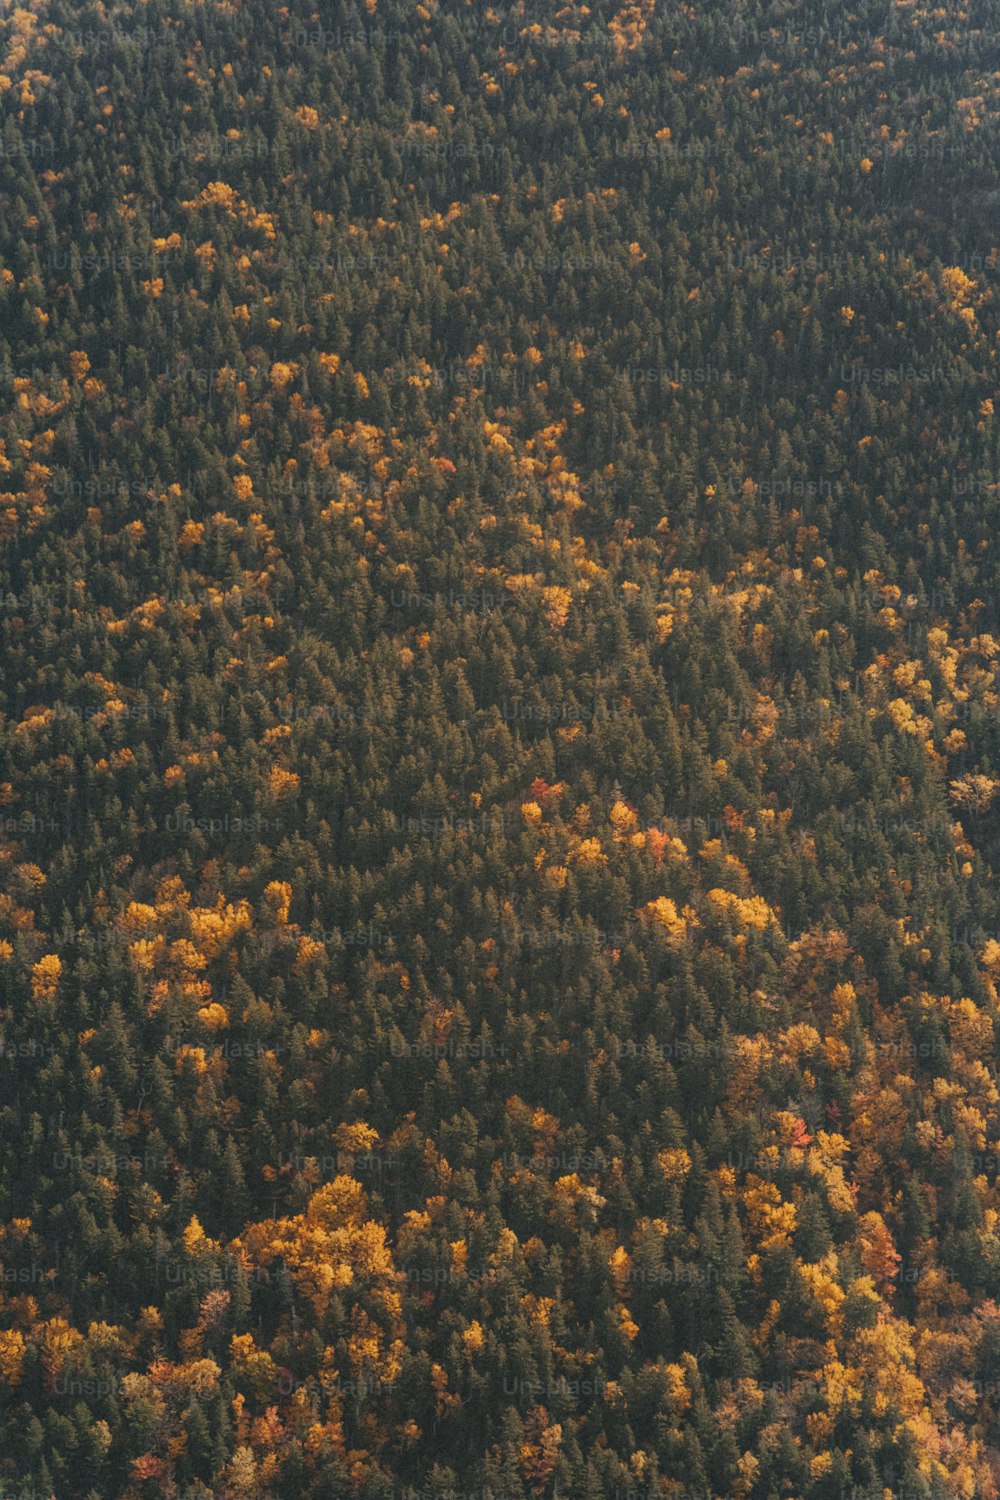 a plane flying over a forest filled with lots of trees